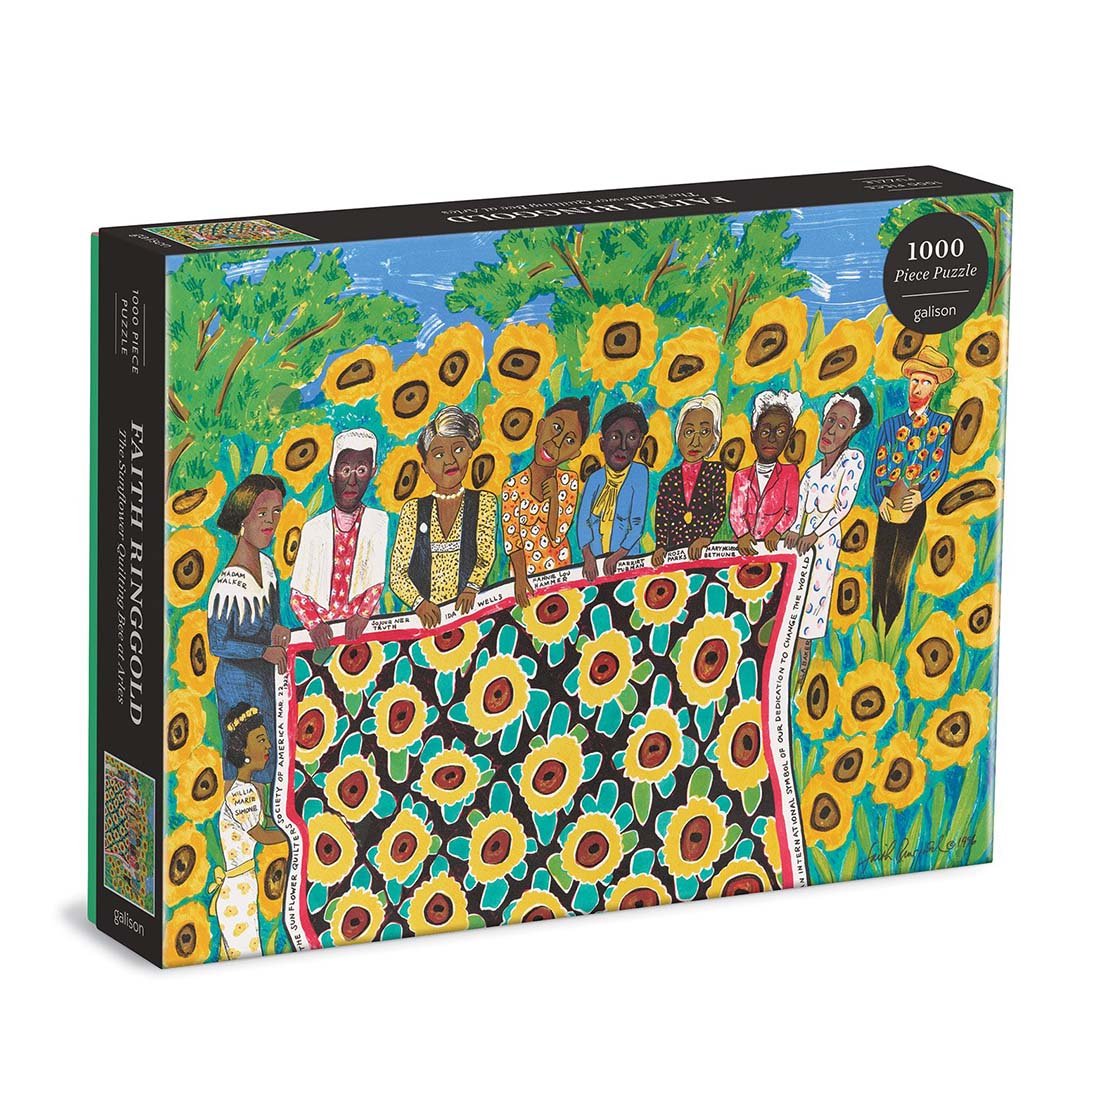 Faith Ringgold the Sunflower Quilting Bee at Arles Puzzle // 1000 Piece